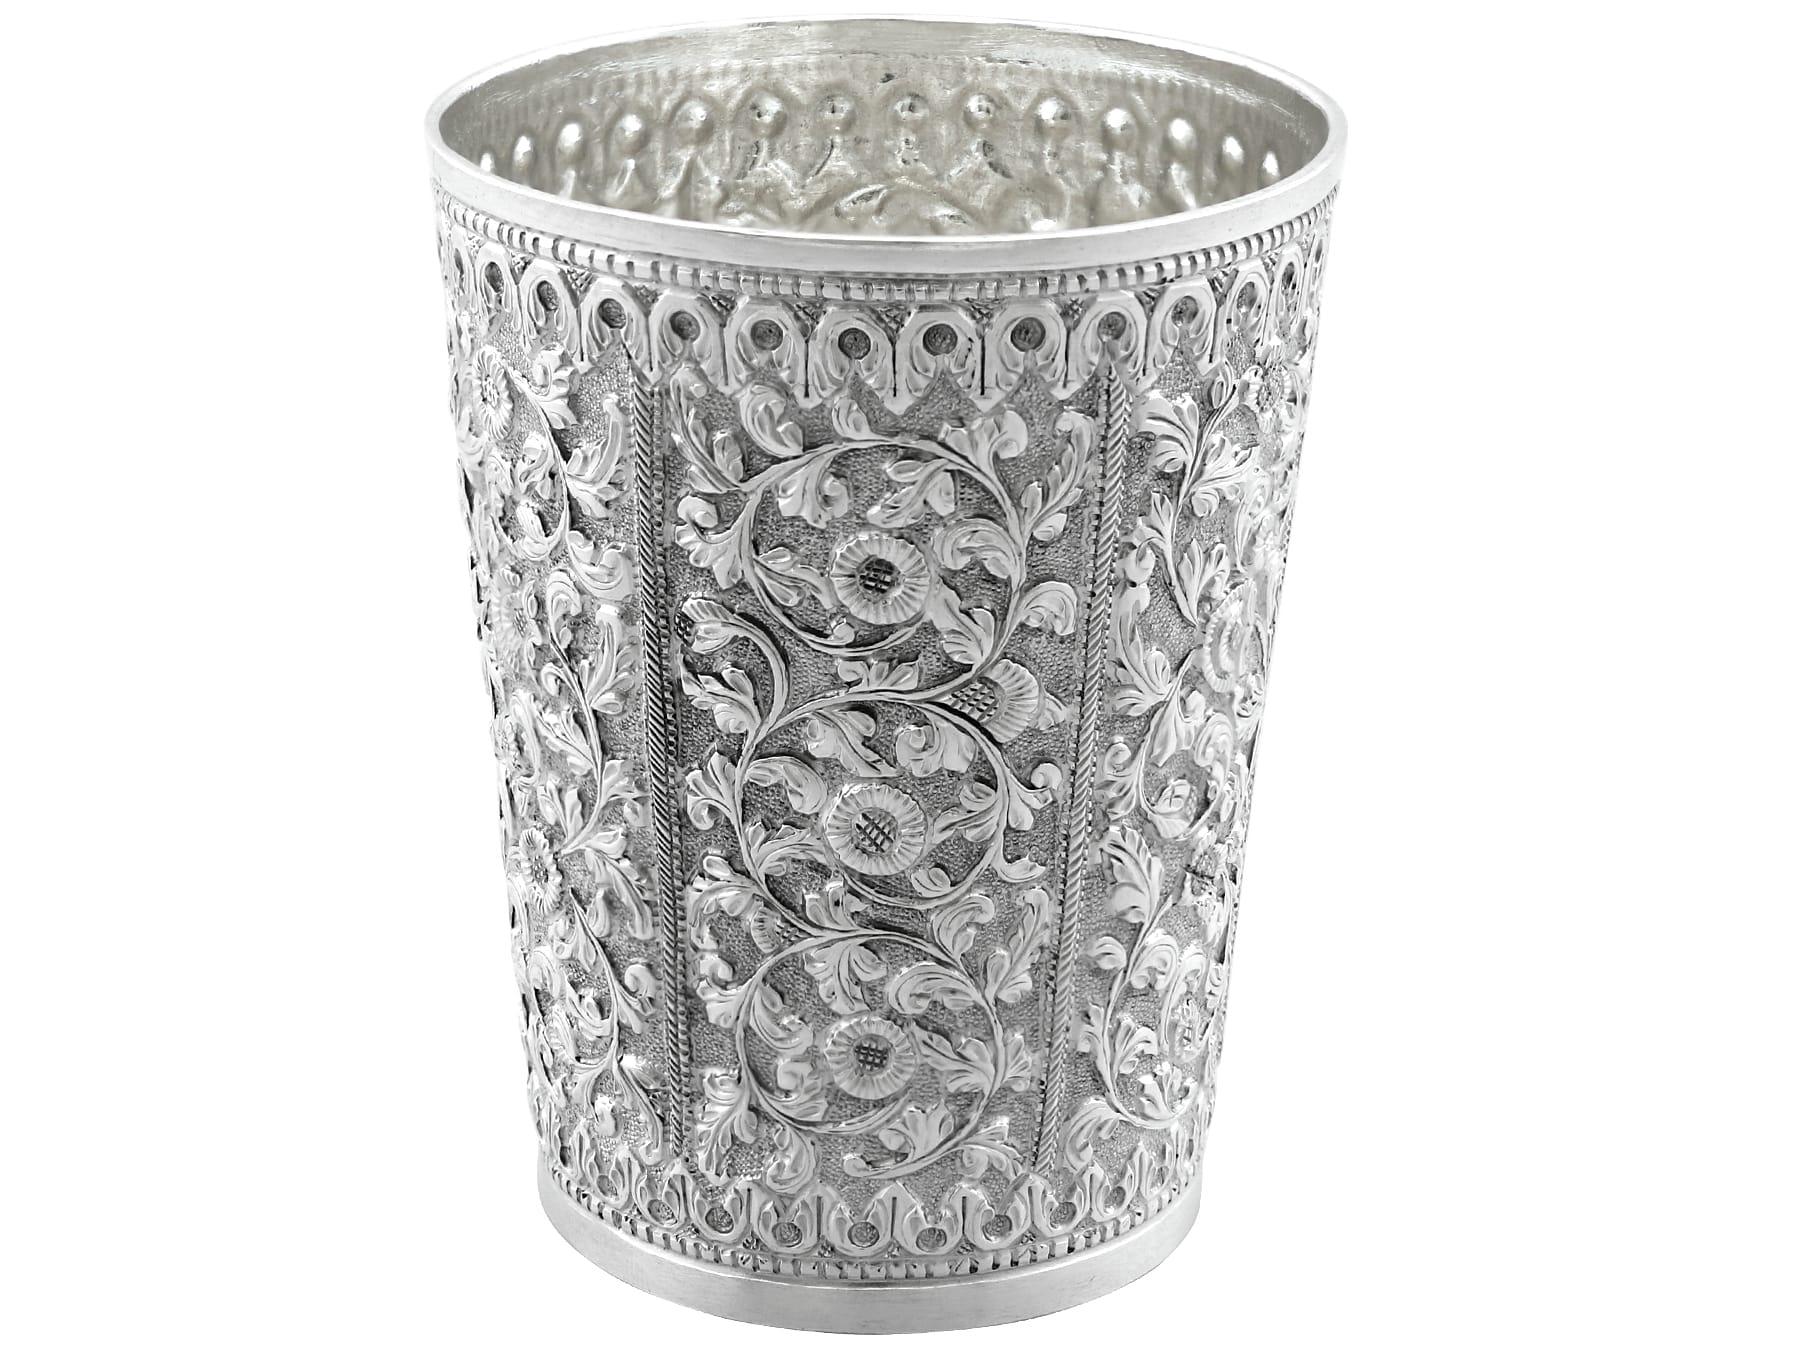 An exceptional, fine and impressive antique Indian silver beaker; an addition to our range of drinks related silverware

This exceptional, fine and impressive antique Indian silver beaker has a cylindrical tapering form.

The surface of the